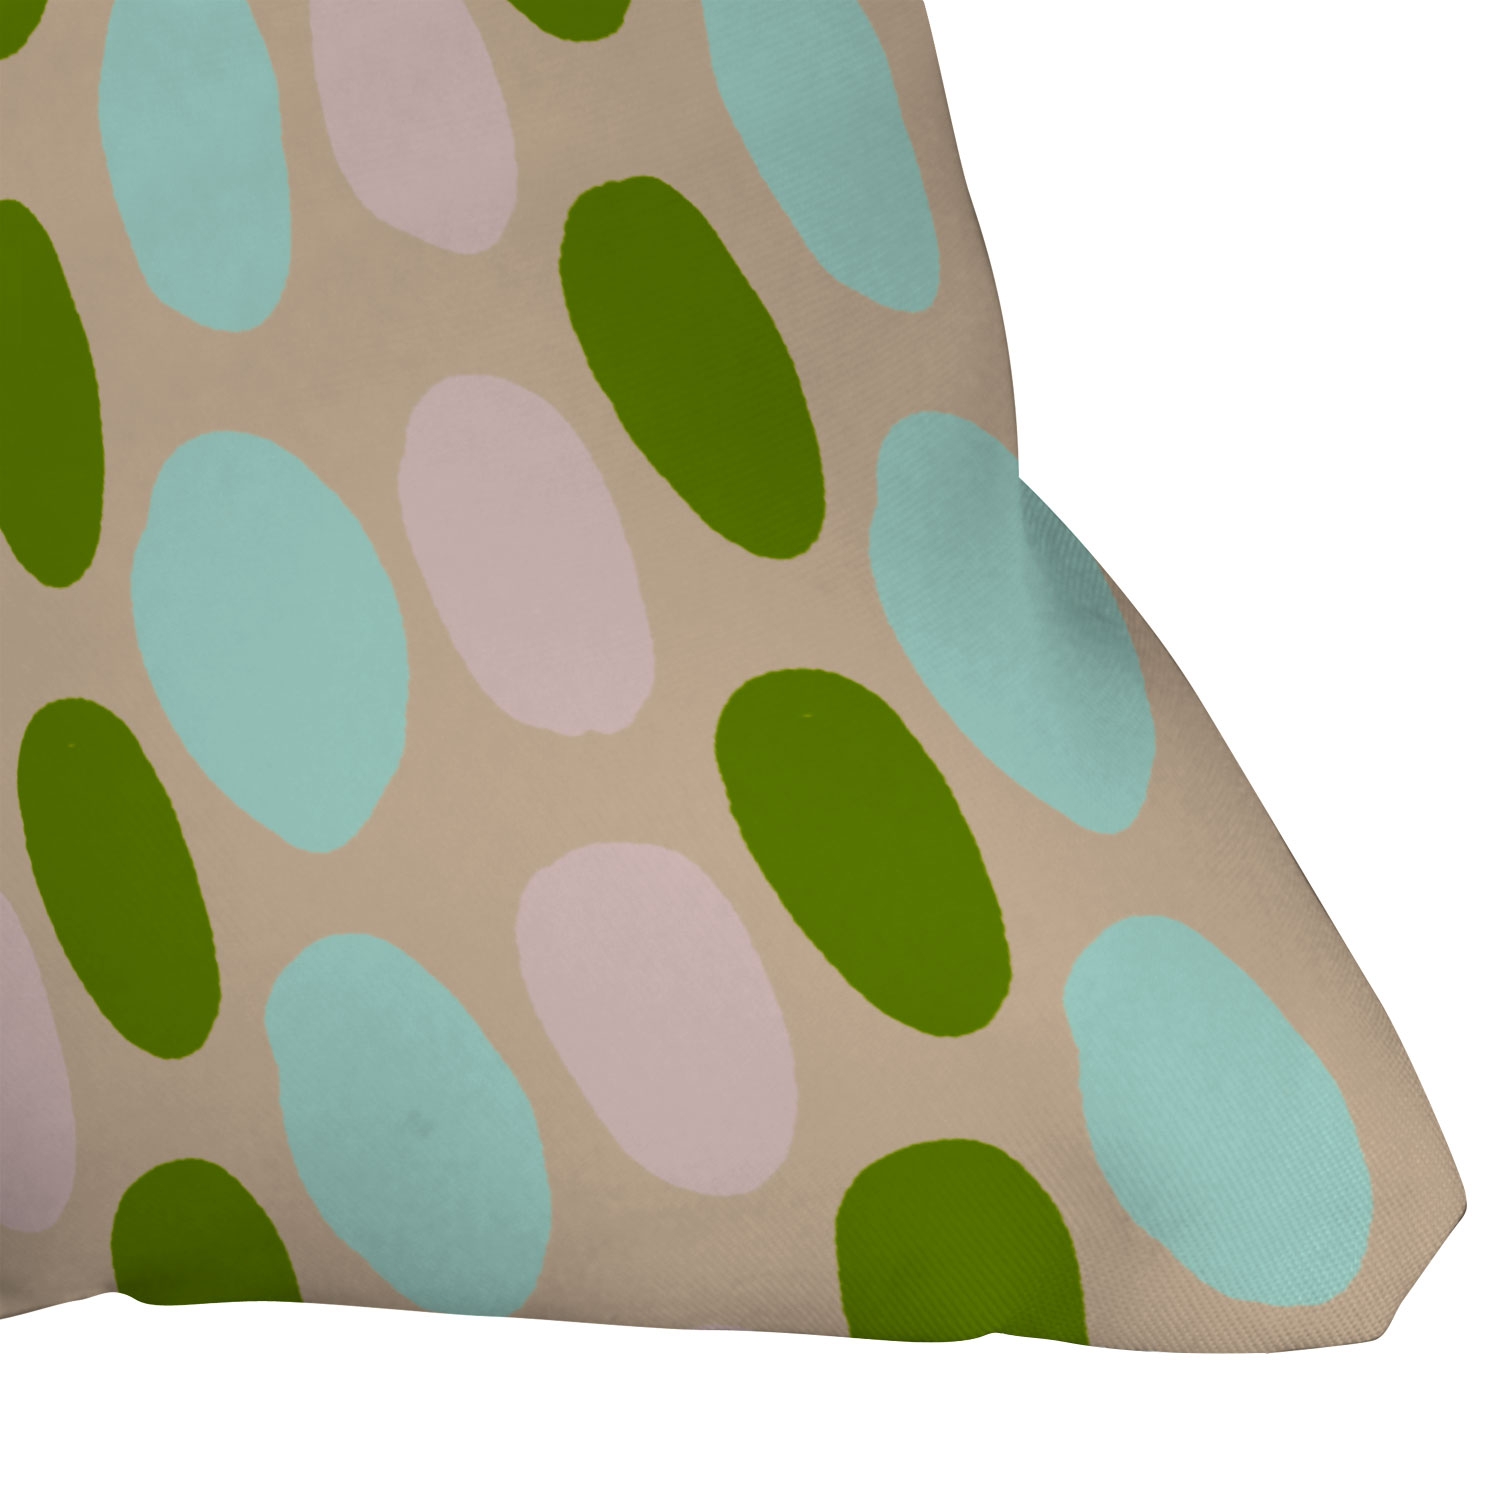 Jellybeans by SunshineCanteen - Indoor Throw Pillow 16" x 16" - Image 2